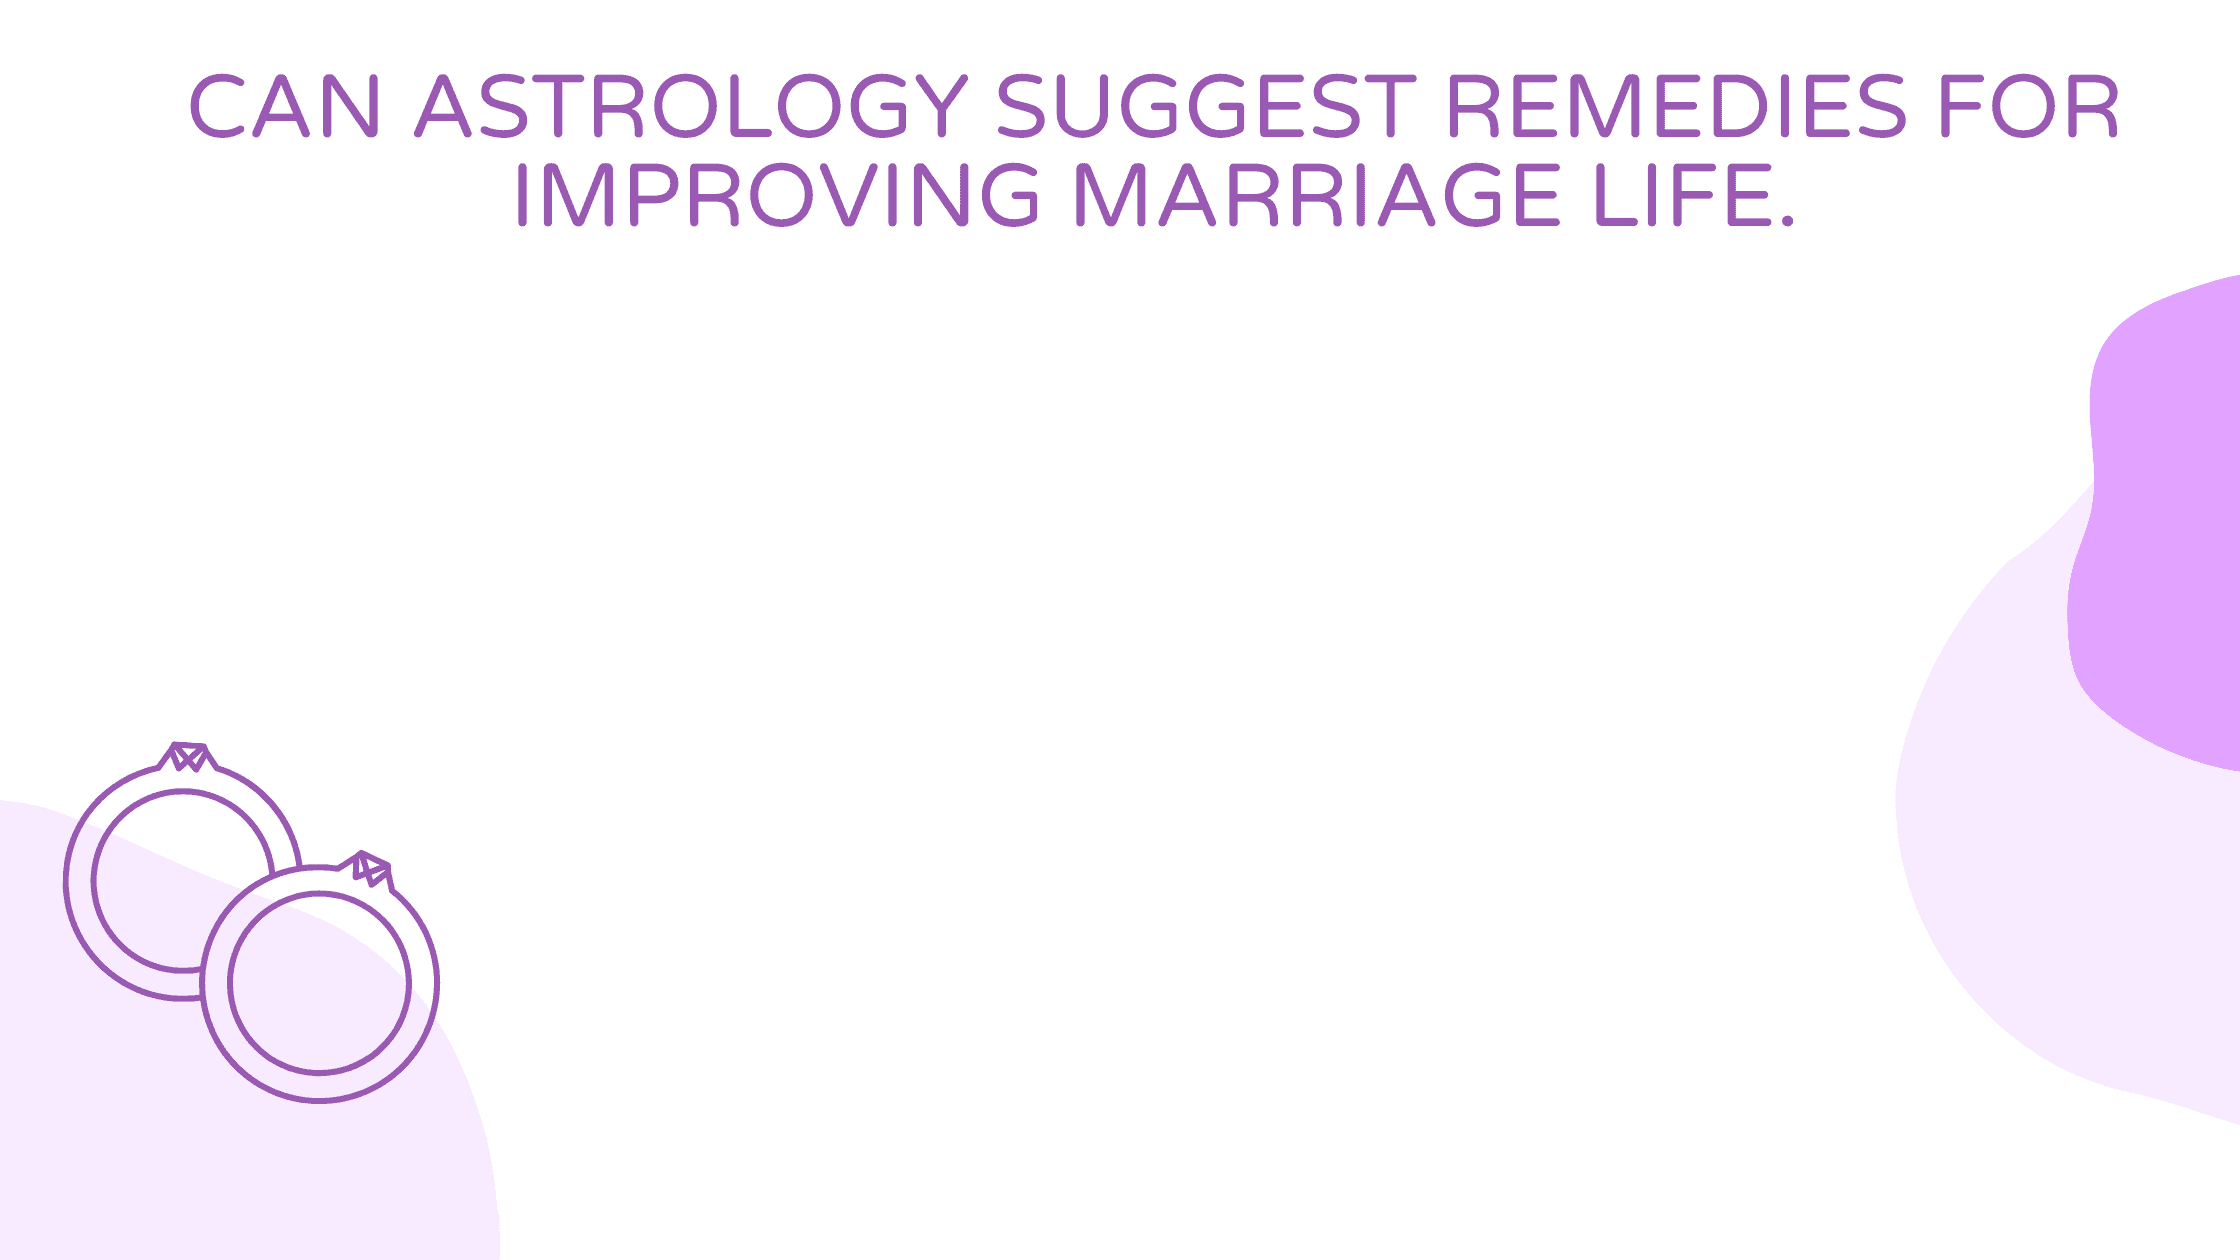 Can Astrology suggest some tips and remedies for improving marriage life